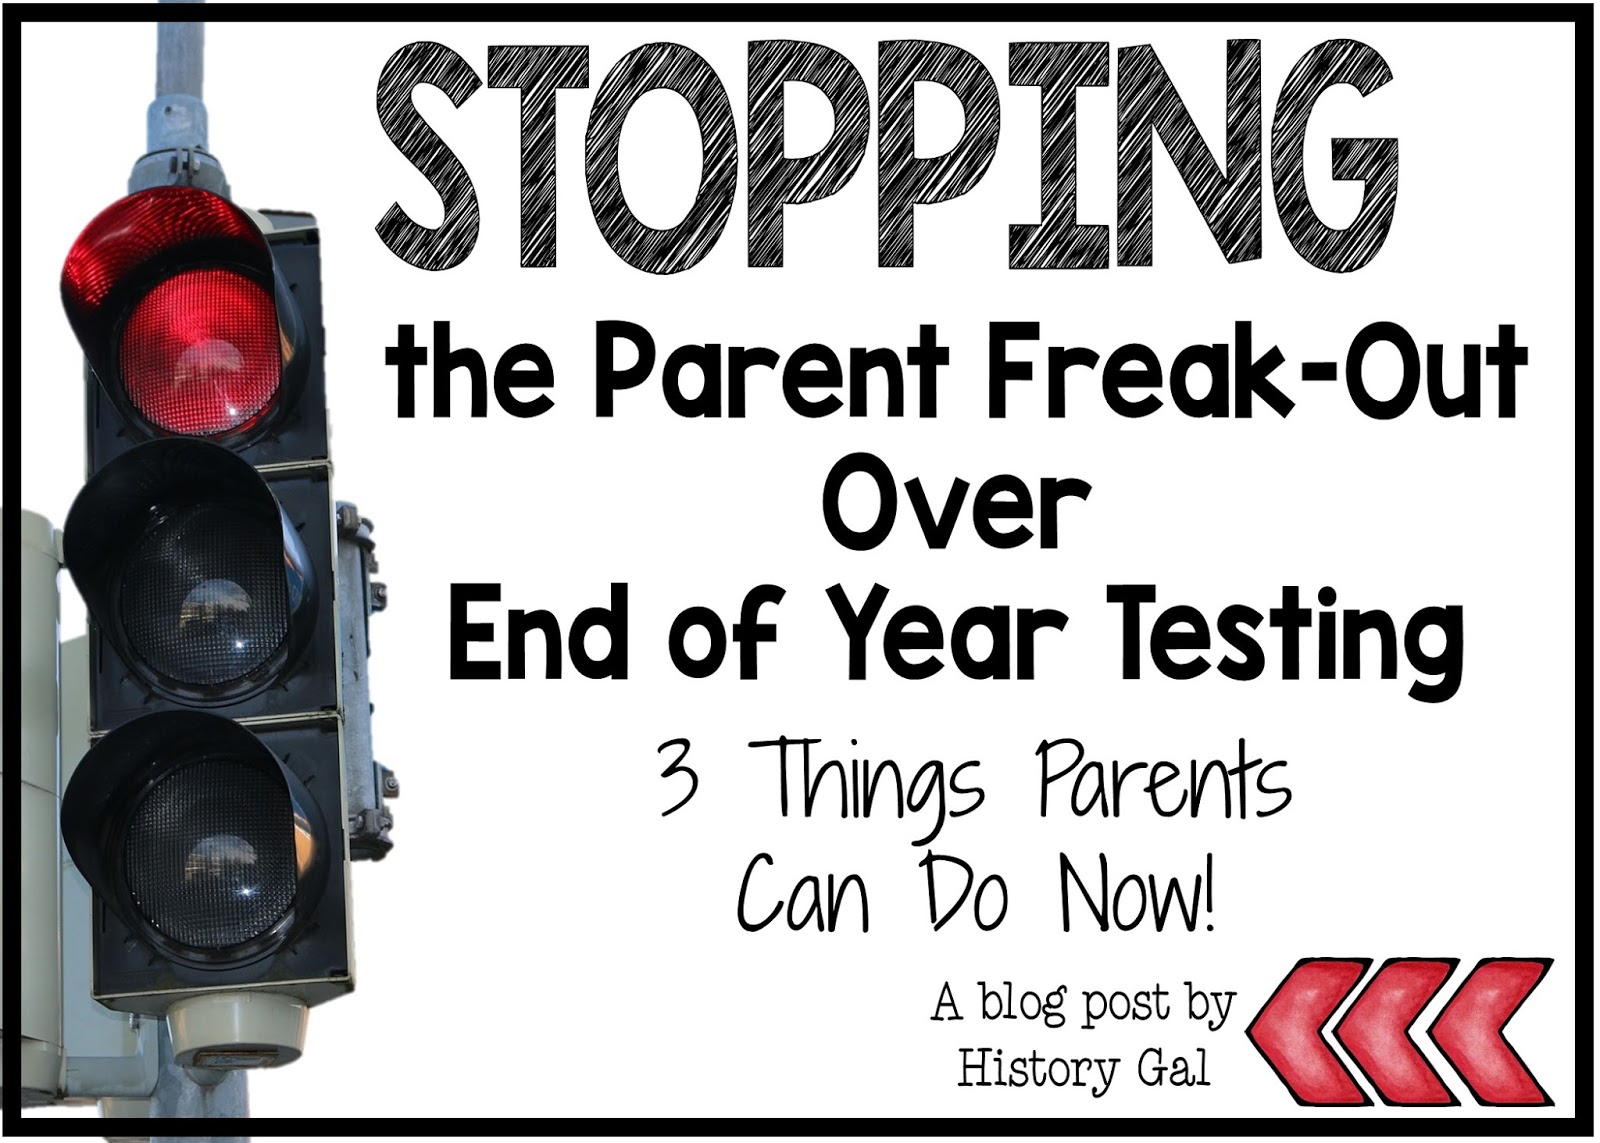 Let's Stop the Parent Freak-out About End of Year Tests By History Gal